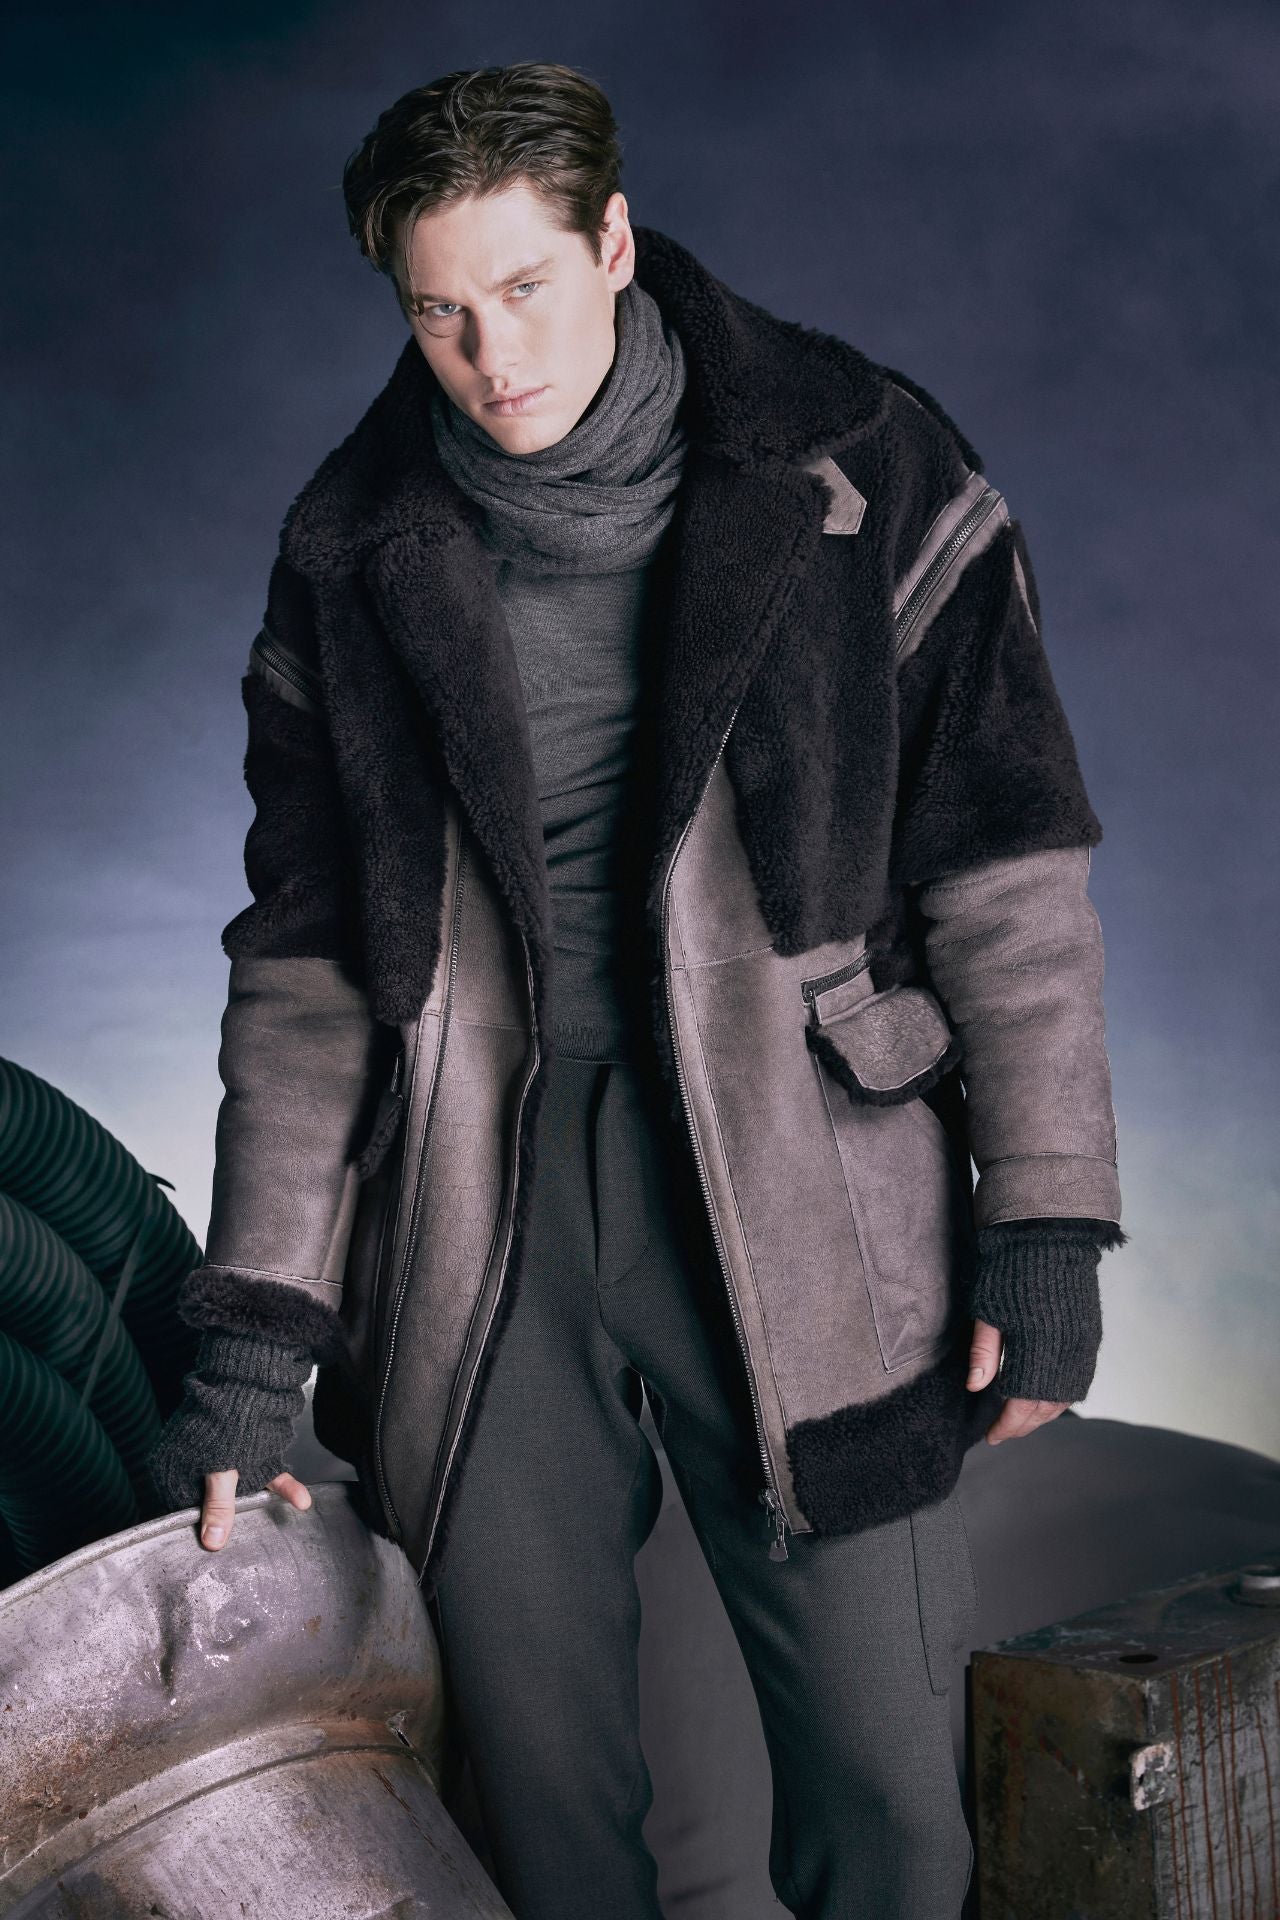  34' wool in wool panels. Converts to vest with zip off sleeves. This zip-front black spanish sheepskin coat has a fashionable edge and gives the perfect winter defense. Oversized notched collar, Collar tabs with belt-loop closure, Two way zipper, Interior zipper pocket